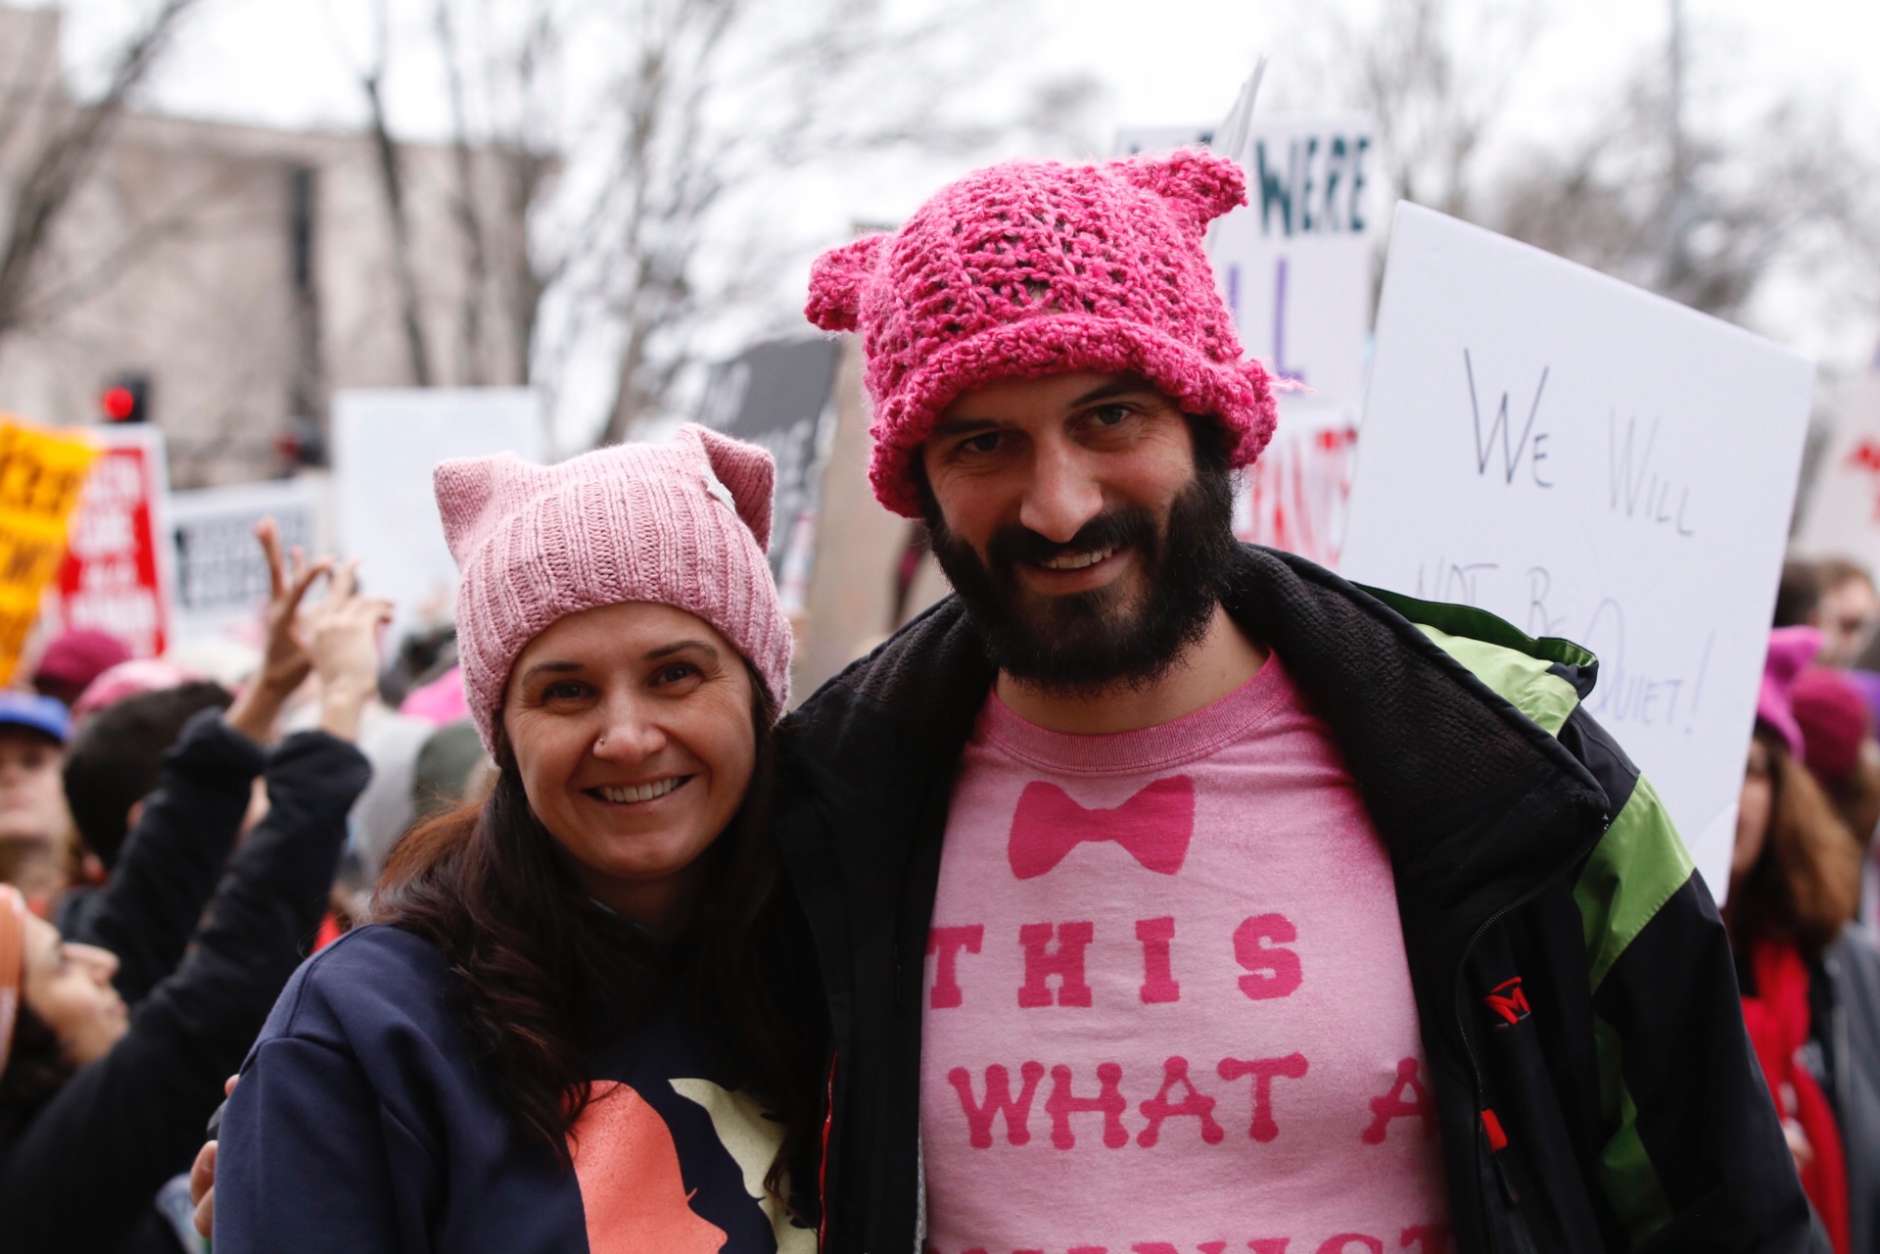 A man sports a shirt that reads, "This is what a feminist looks like" during the Women's March on Washington on Saturday, Jan. 21, 2017. (WTOP/Kate Ryan)